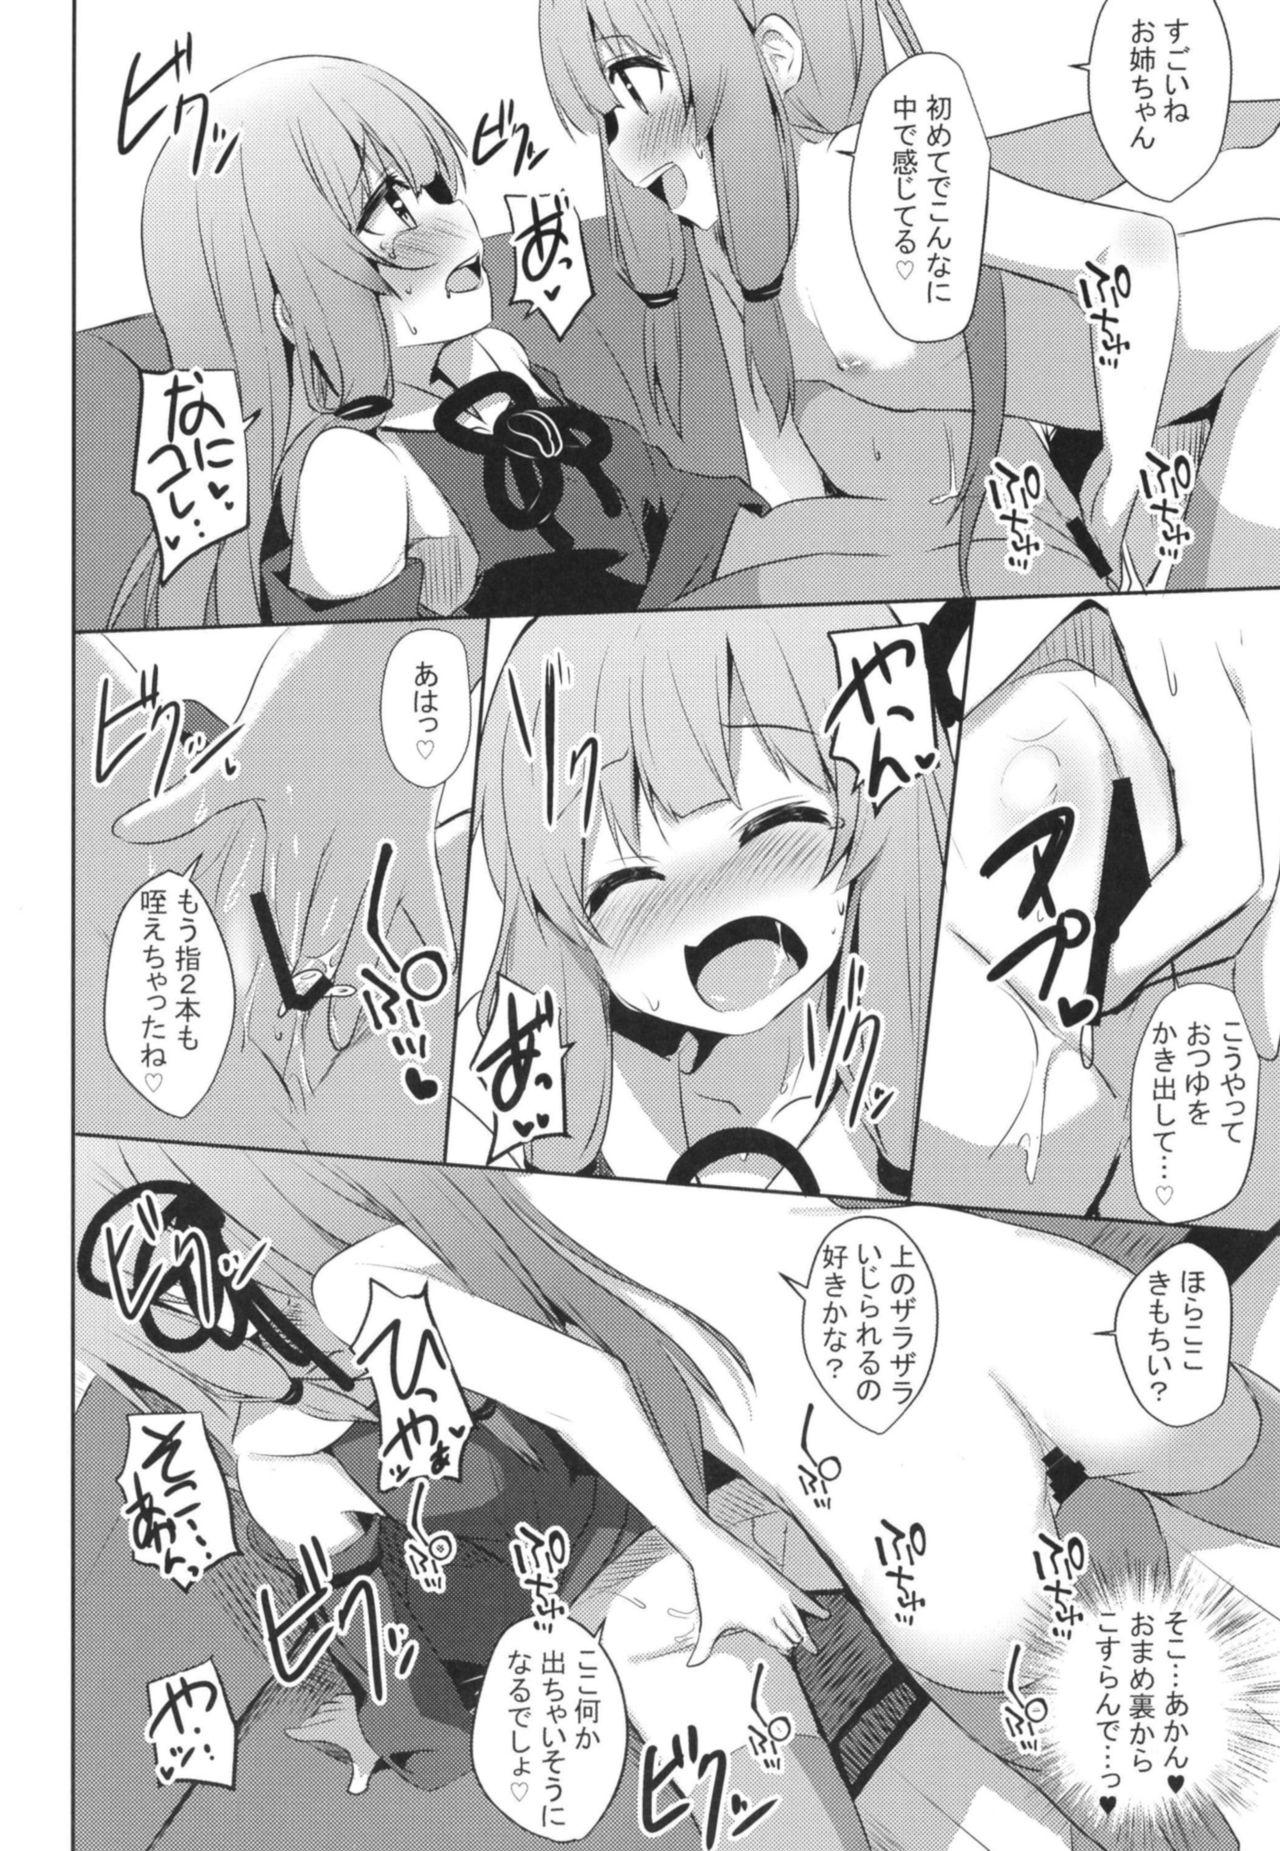 Asslicking [Milk Pudding (Jamcy)] Akane-chan Challenge! 4-kaime (VOICEROID) [Digital] - Voiceroid Outdoor Sex - Page 7